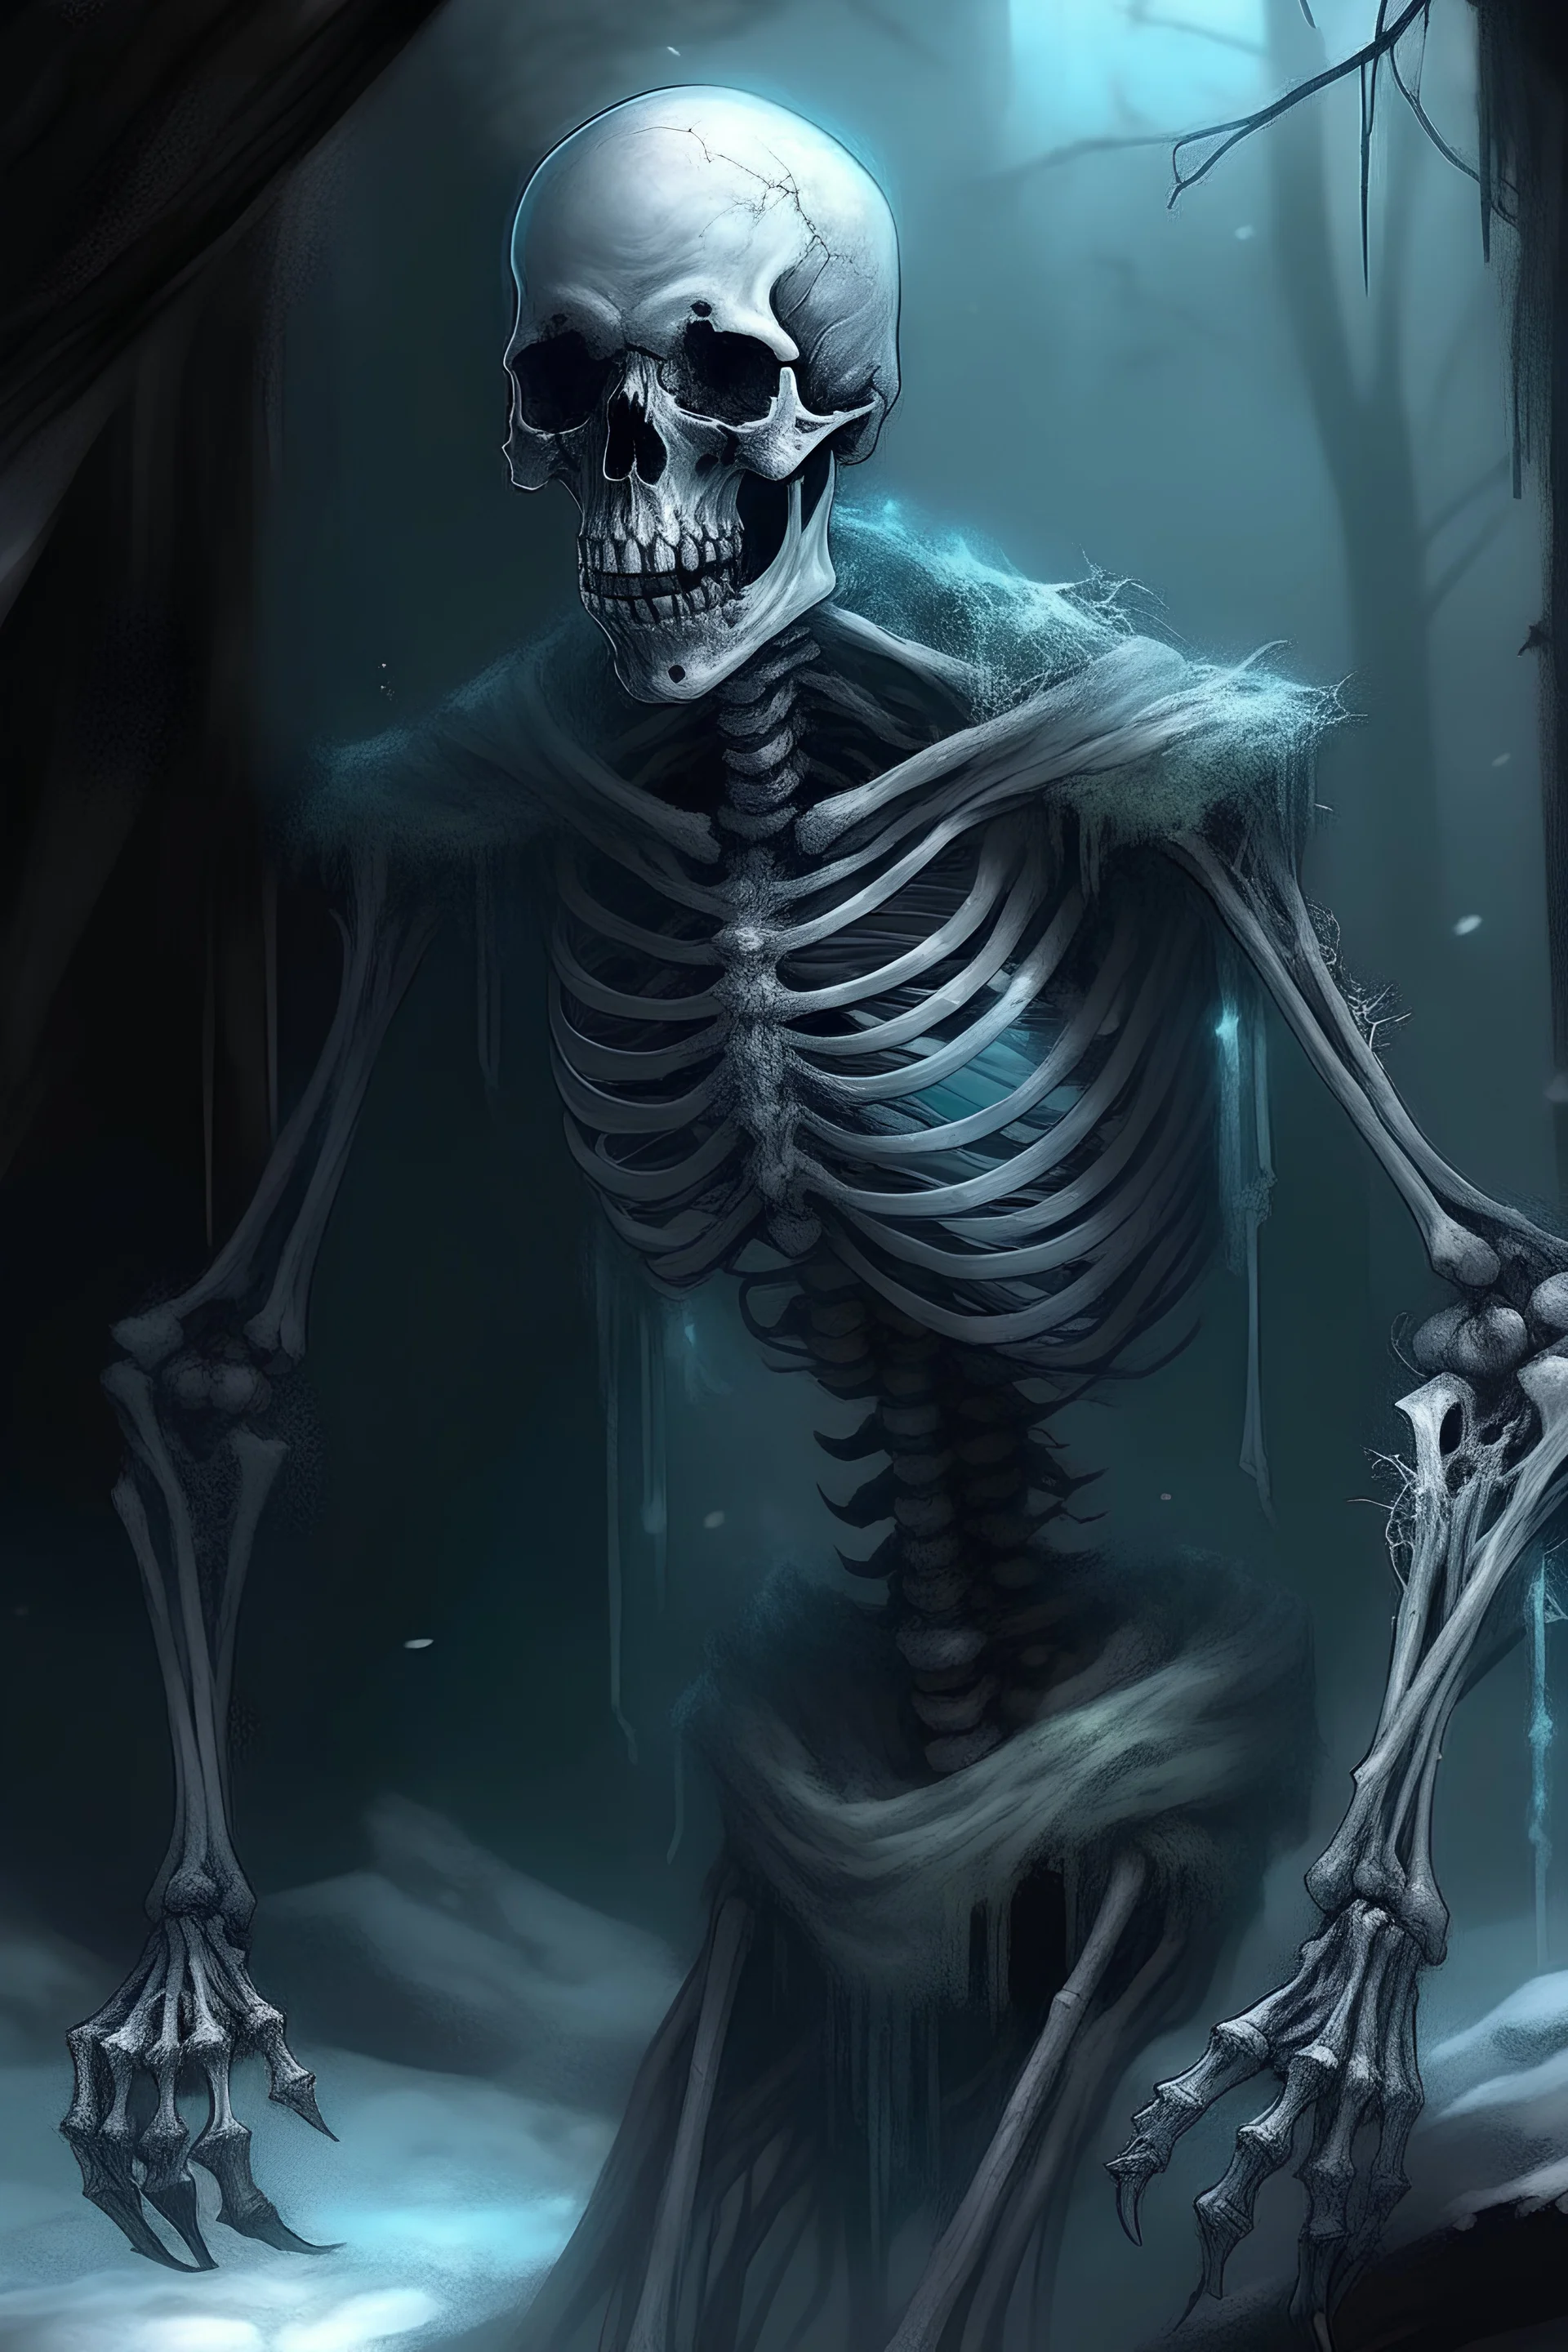 Corpse: Appearance: The corpse appears as a frozen, reanimated human form. Tattered remnants of clothing hang from its skeletal frame, and an eerie glow emanates from its frozen eyes, indicating an otherworldly force animating its movements.